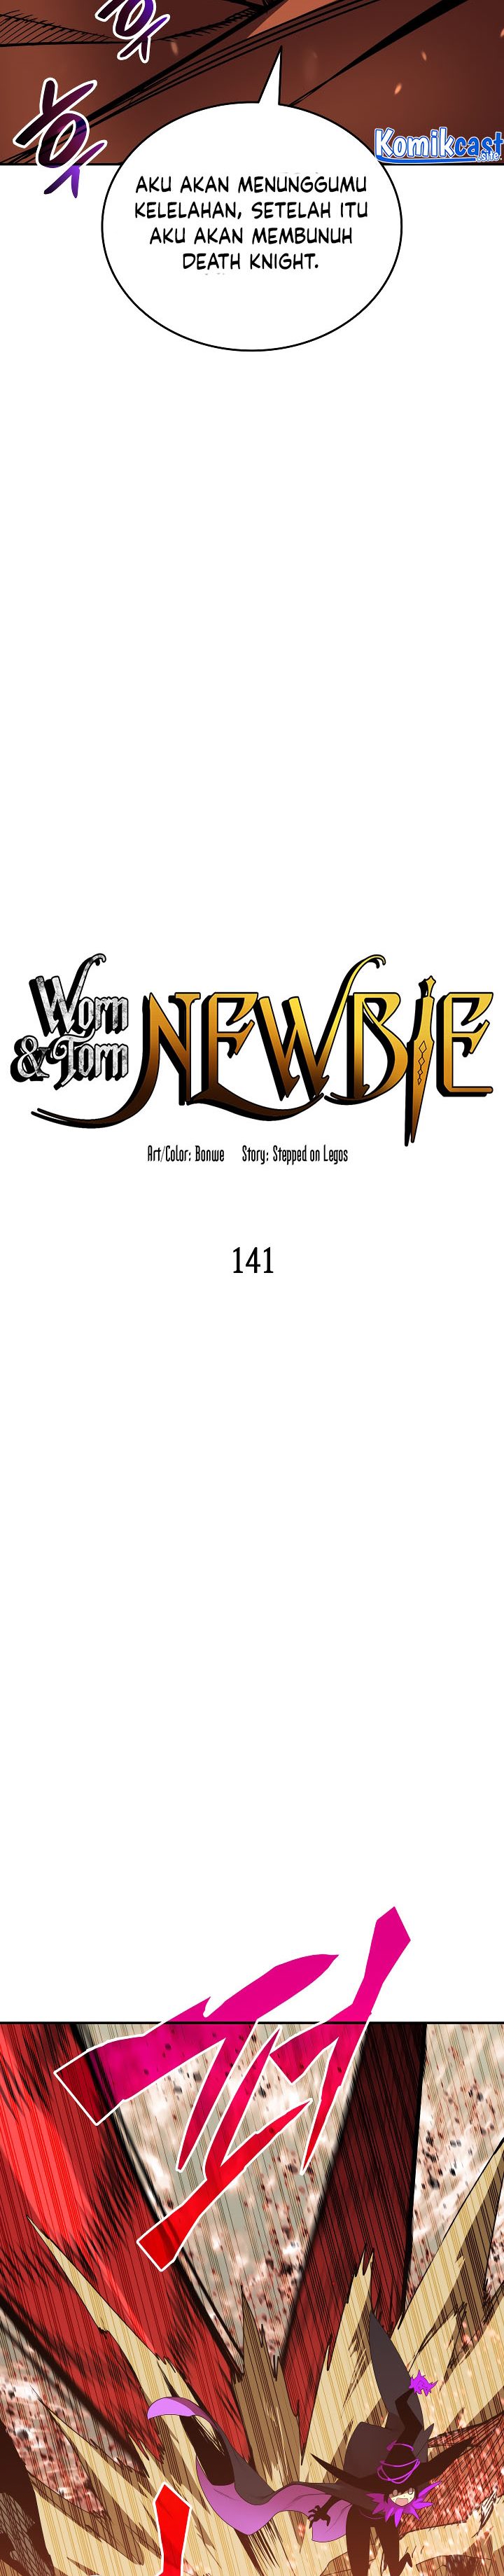 Worn and Torn Newbie Chapter 141 Image 9